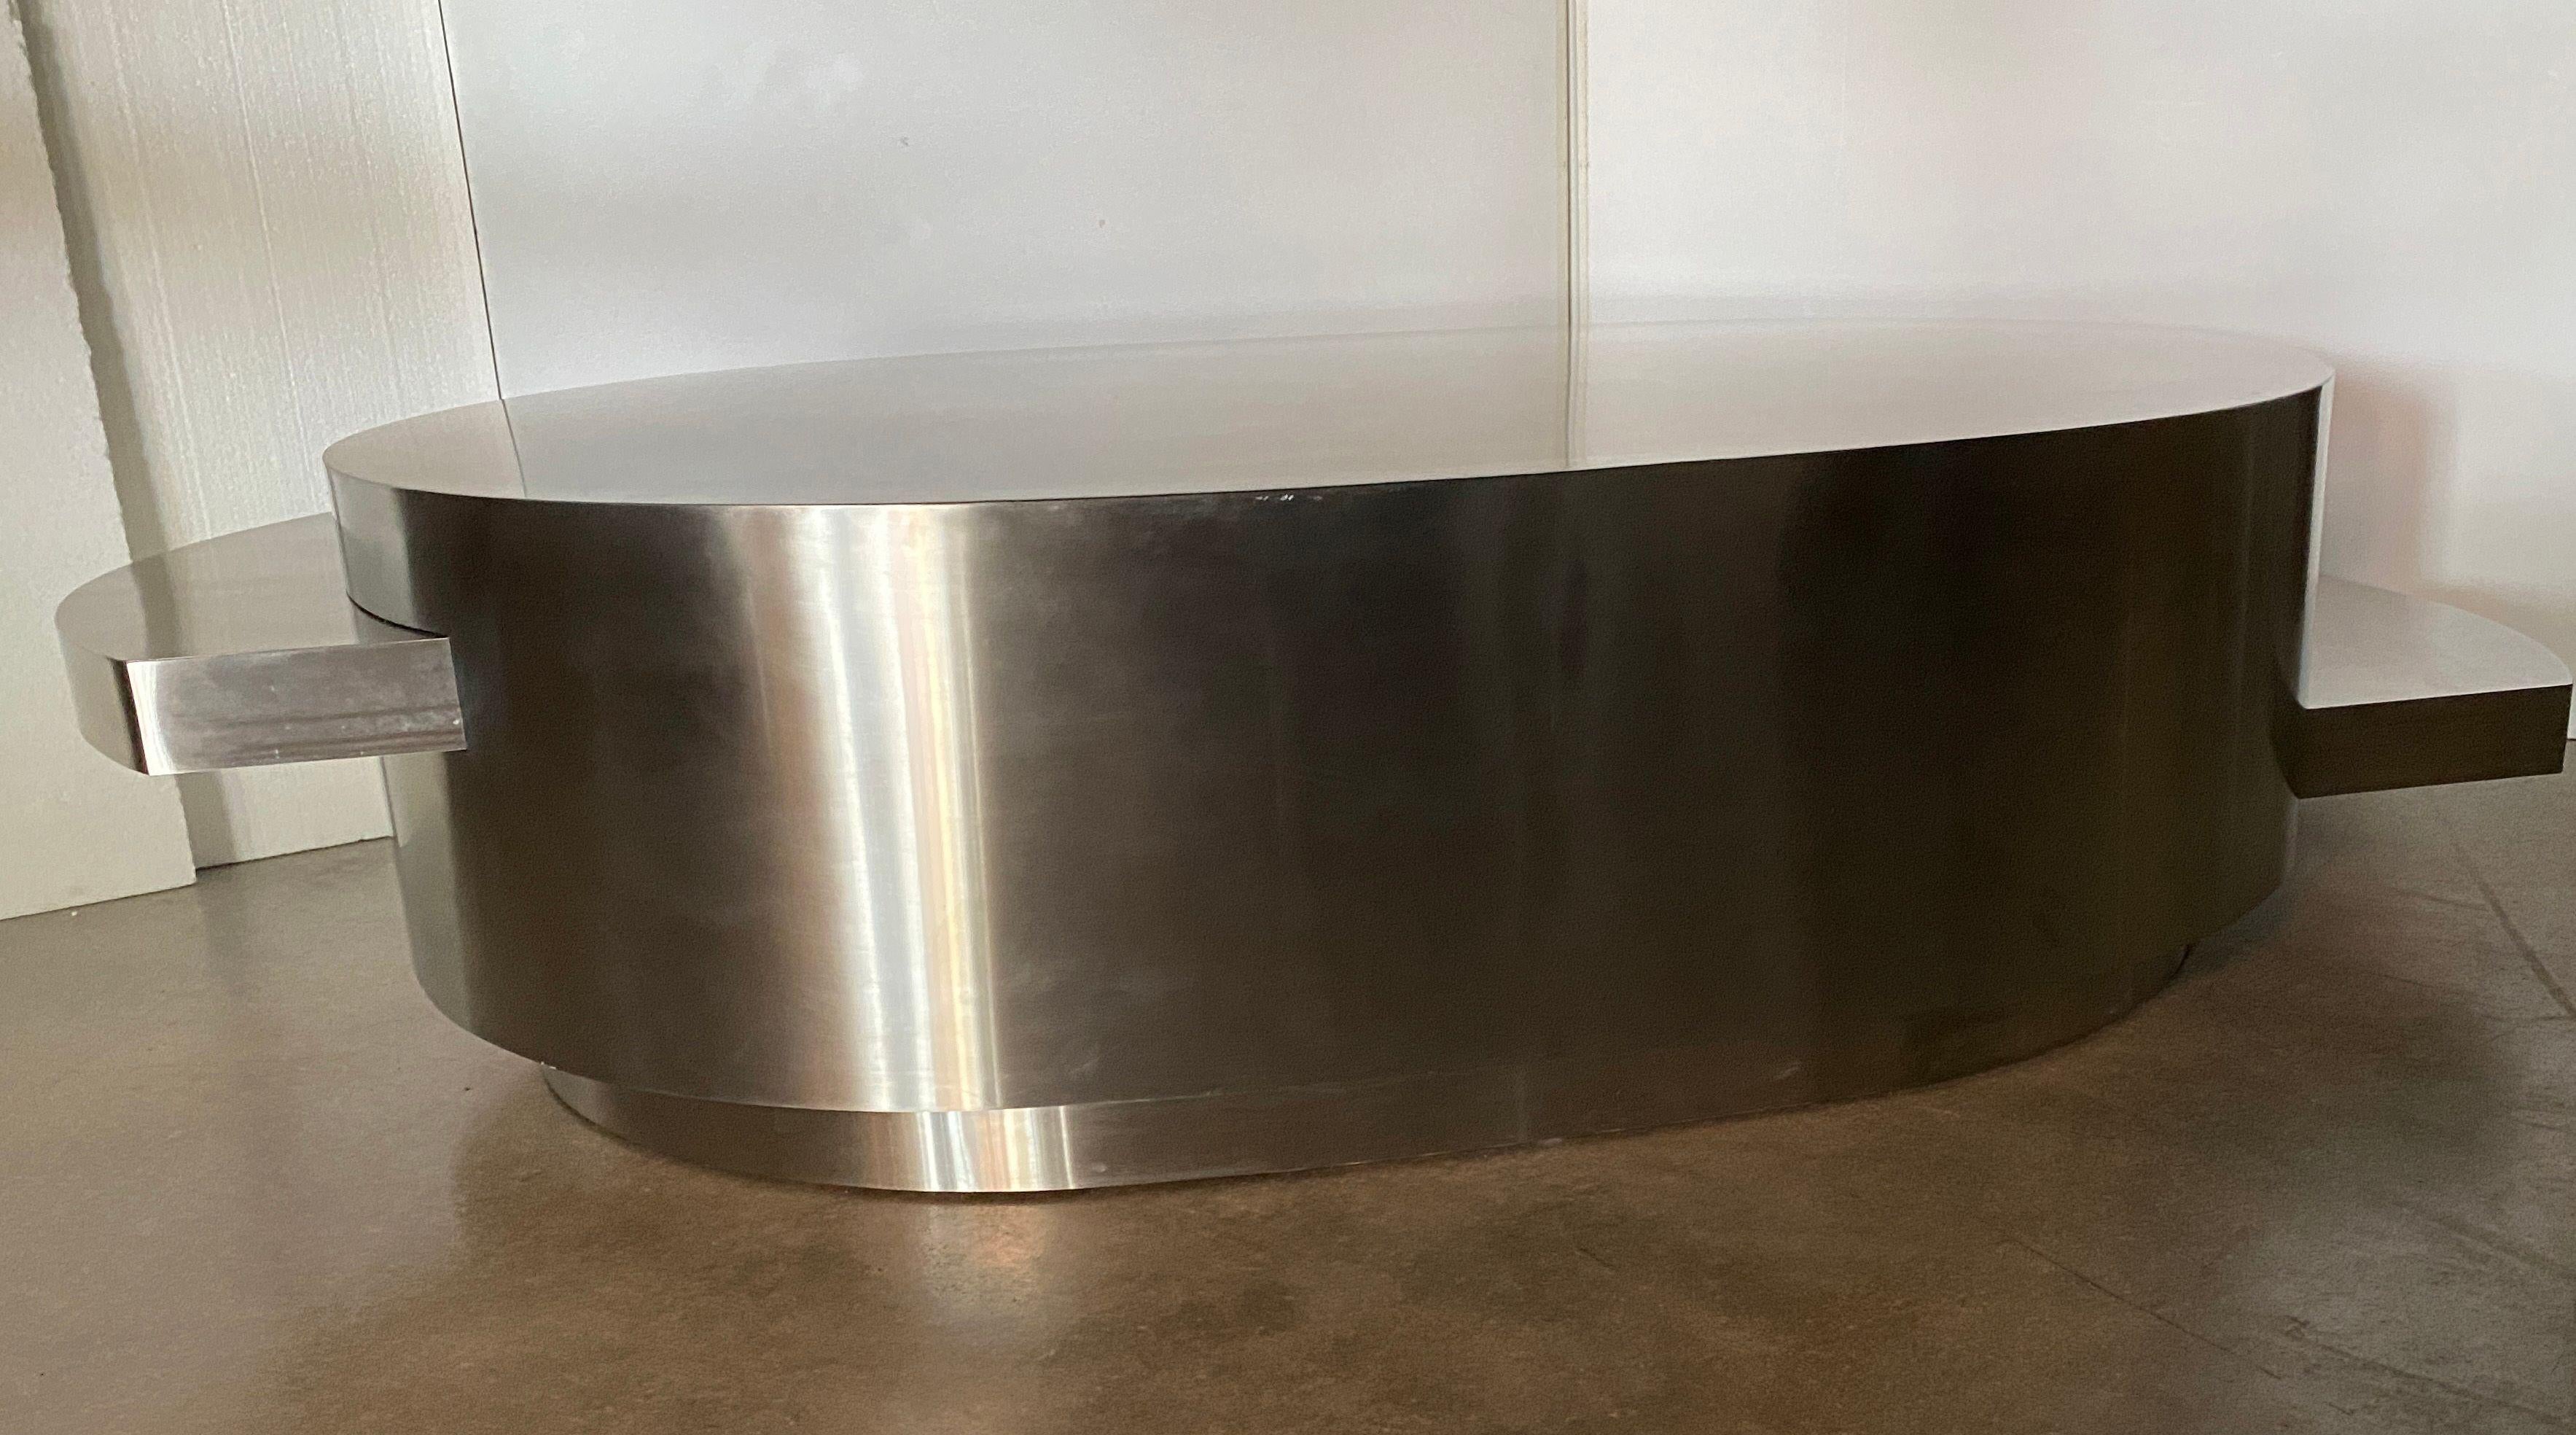 A rare stainless steel coffee table by Gabriella Crespi. Likely an early Ellisse model from the from the Plurimi series. The oval body done in stainless steel with 2 sliding elliptical tops in stainless steel. Extends from 51